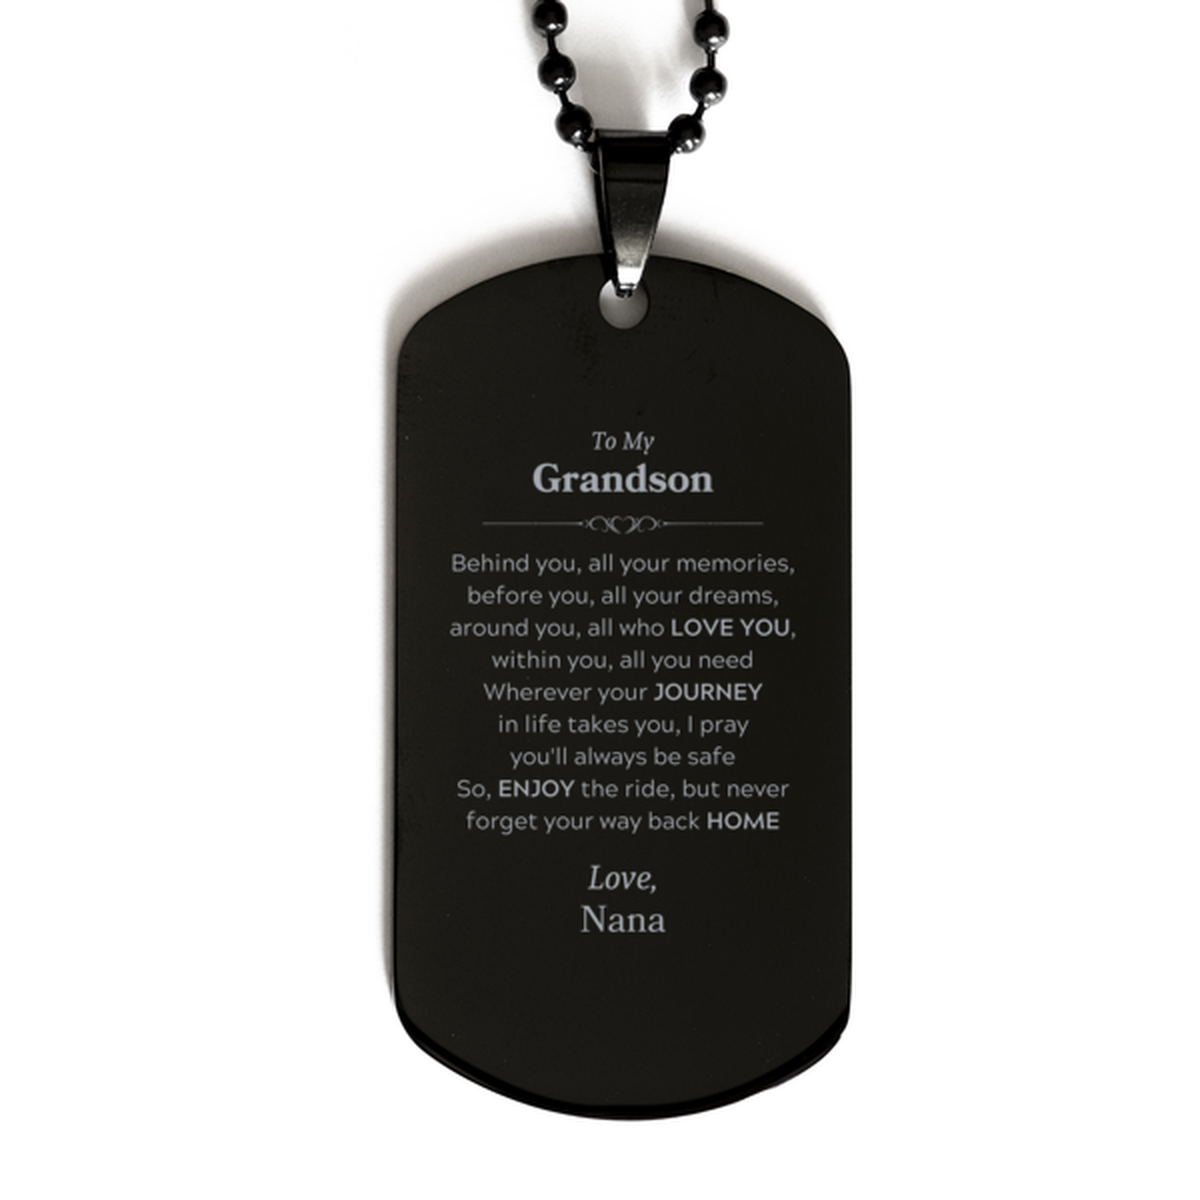 To My Grandson Graduation Gifts from Nana, Grandson Black Dog Tag Christmas Birthday Gifts for Grandson Behind you, all your memories, before you, all your dreams. Love, Nana